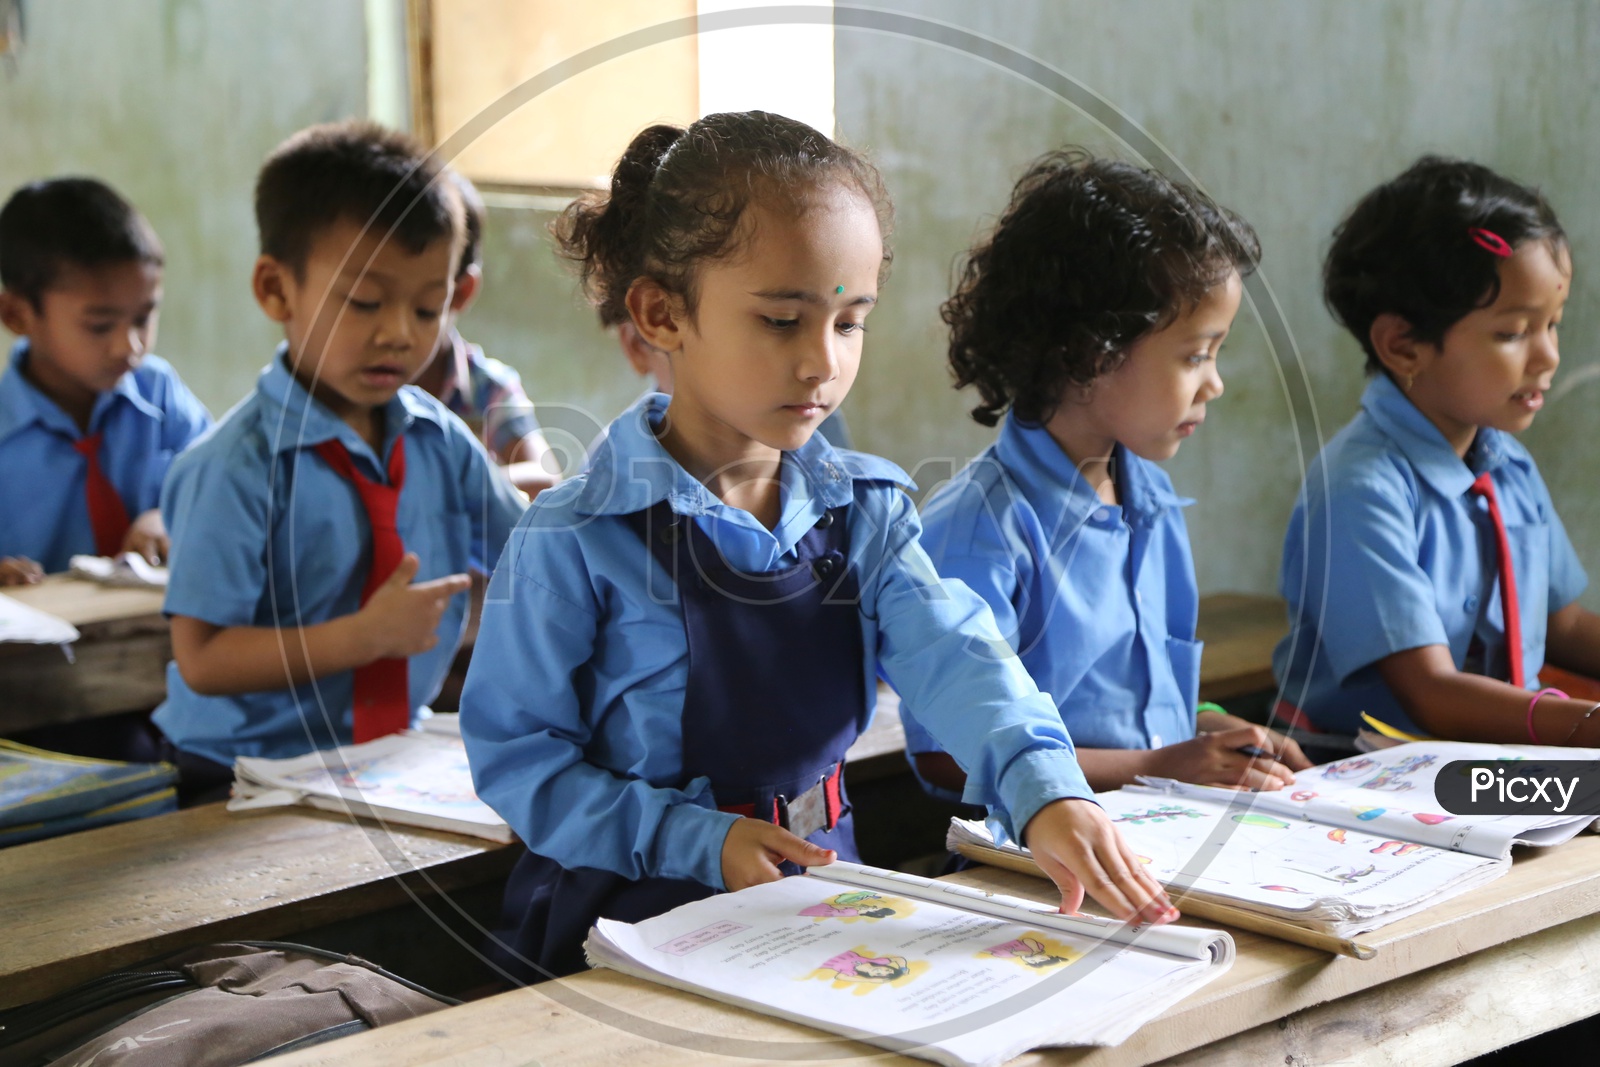 School Children or School Students In Uniforms With Books  Infront Of Them in A Classroom